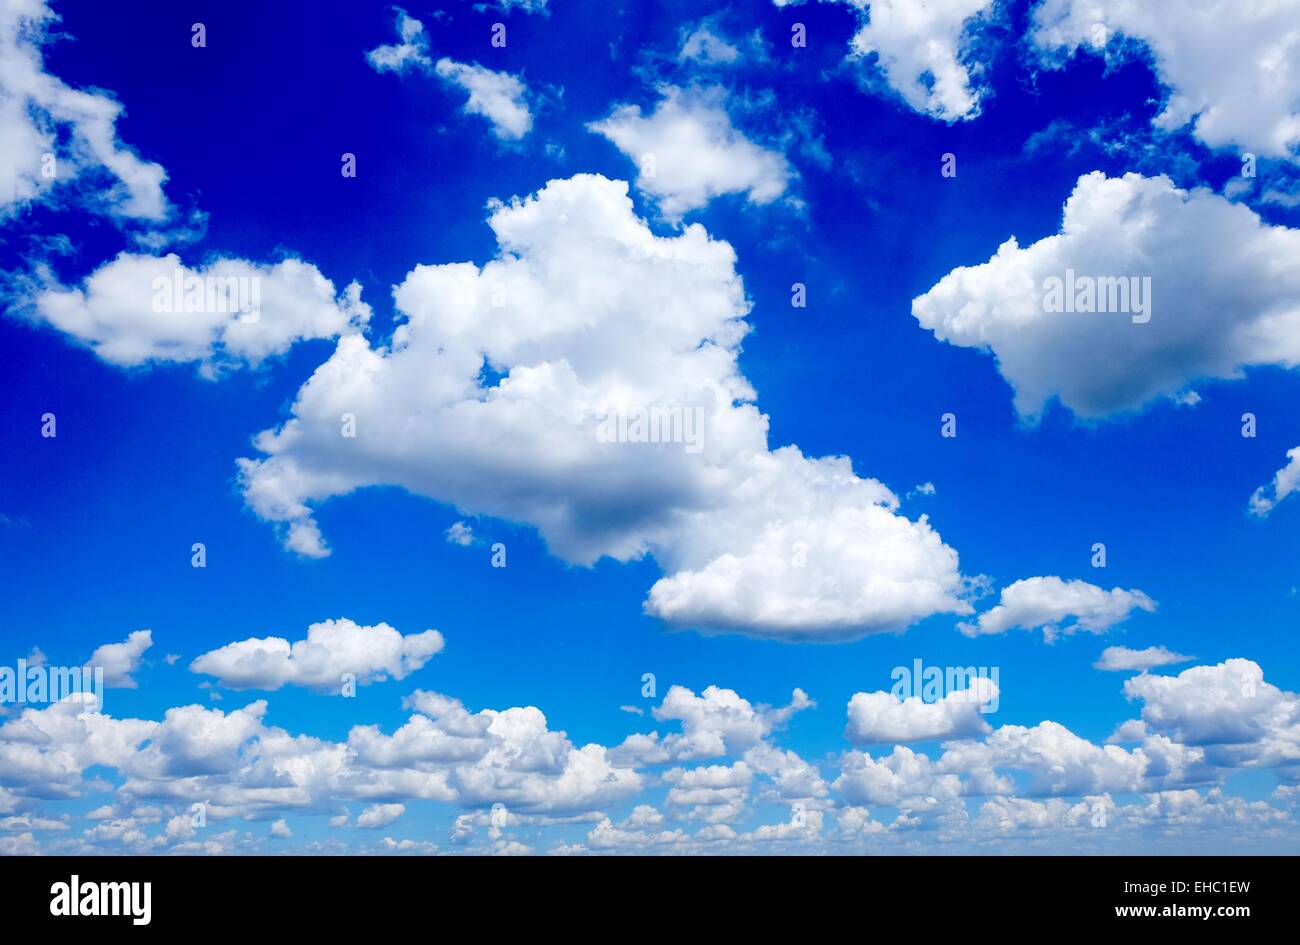 Beautiful Blue Sky With White Clouds. Wide Angle View. Stock Photo